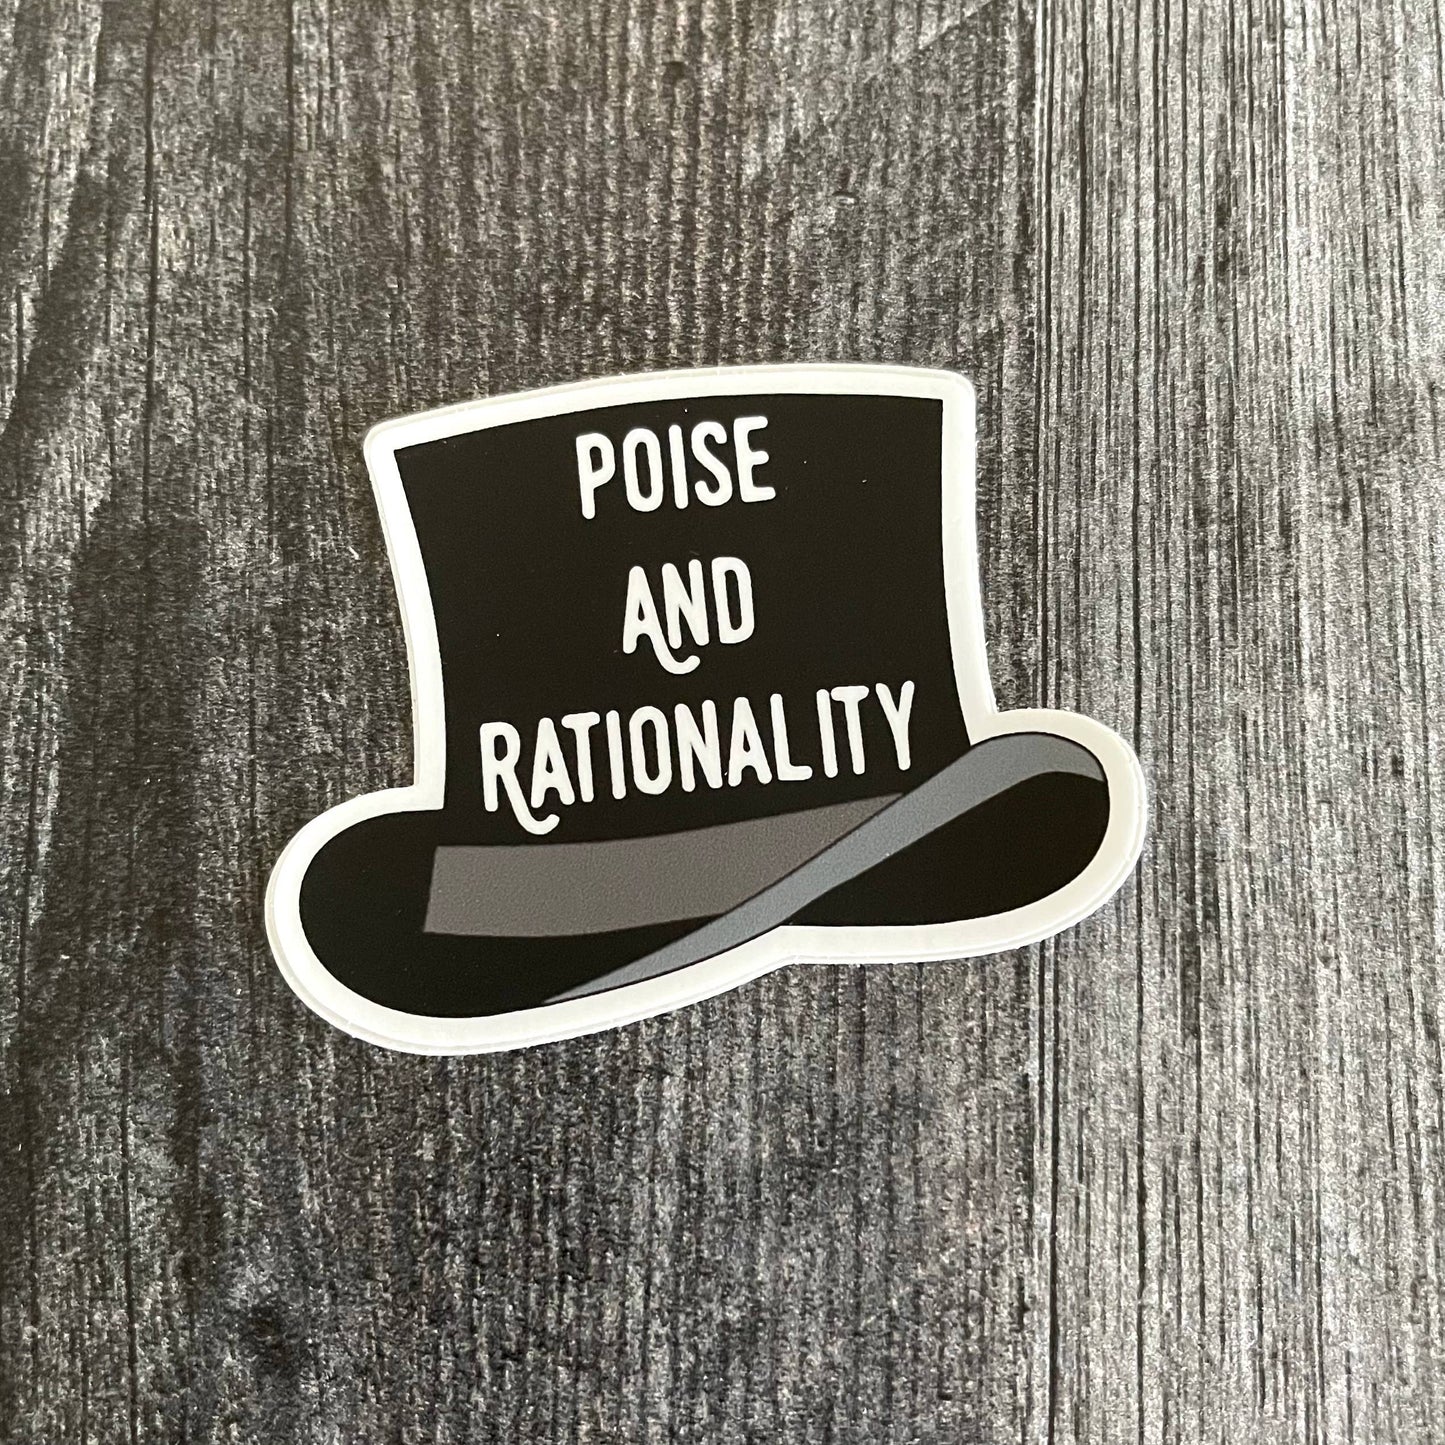 The Silver Spider - Poise and Rationality Emo Lyrics Sticker,